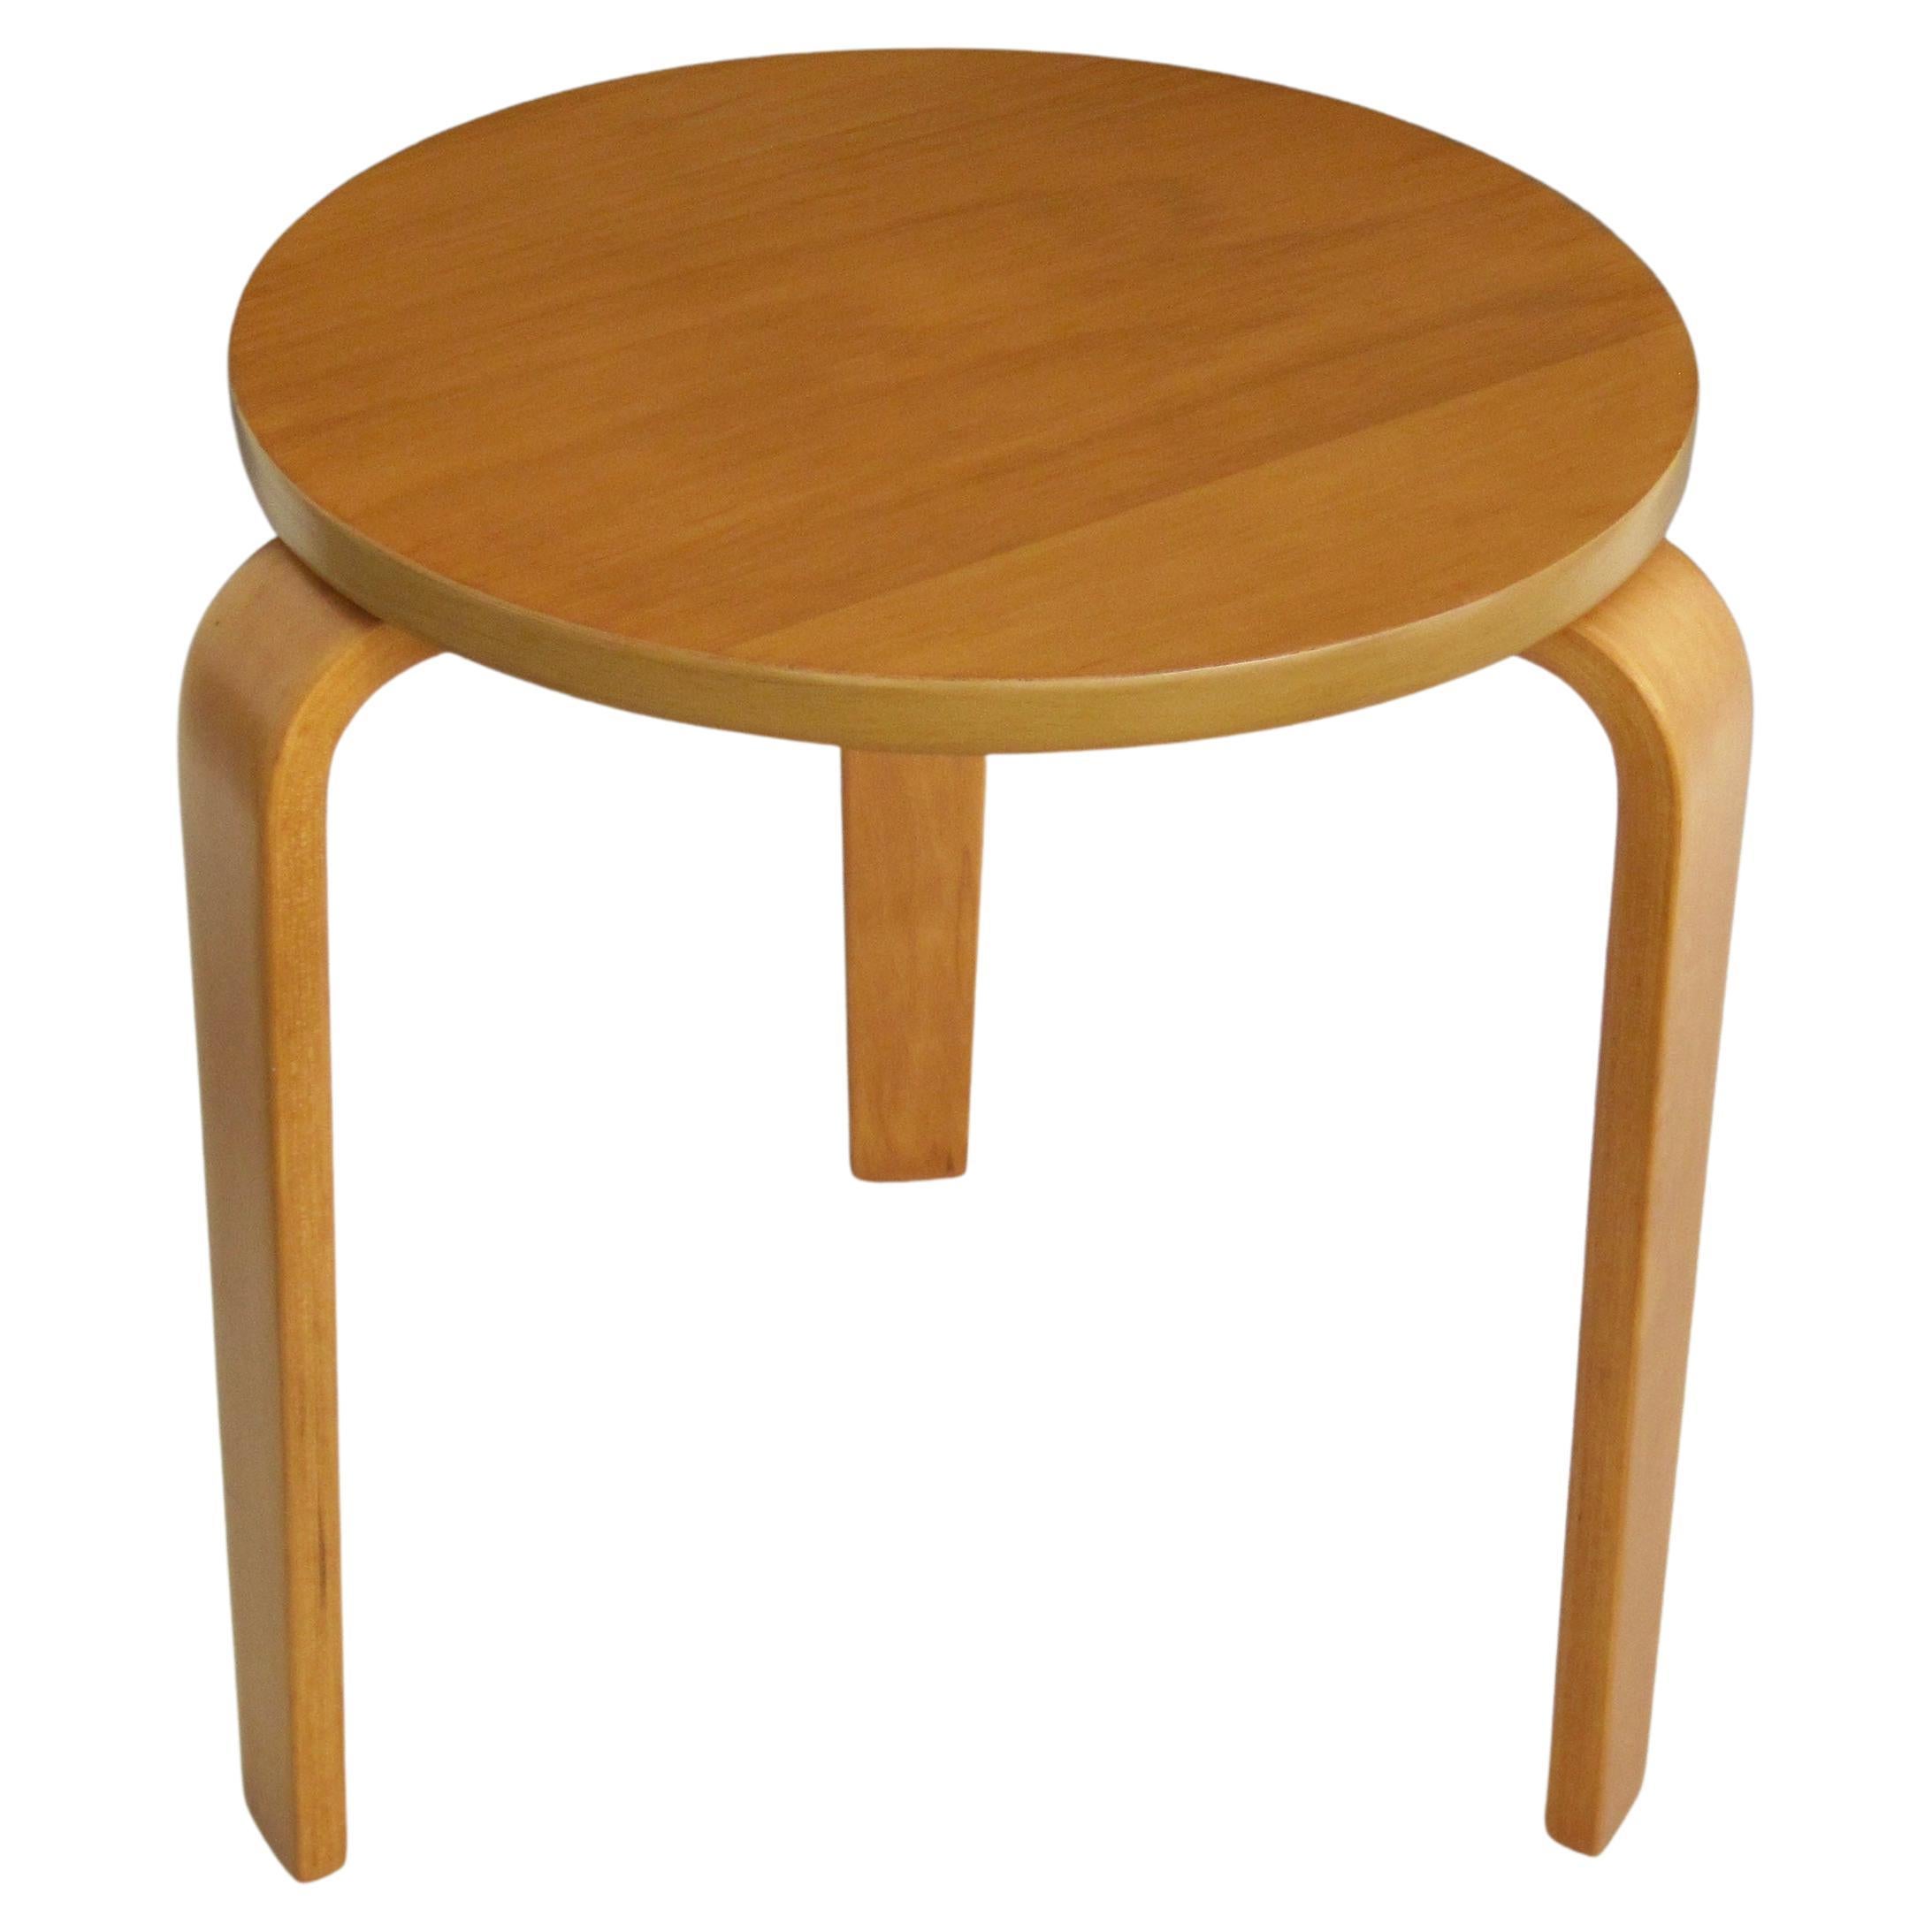 Alvar Aalto Style Side Table or Stool by Thonet